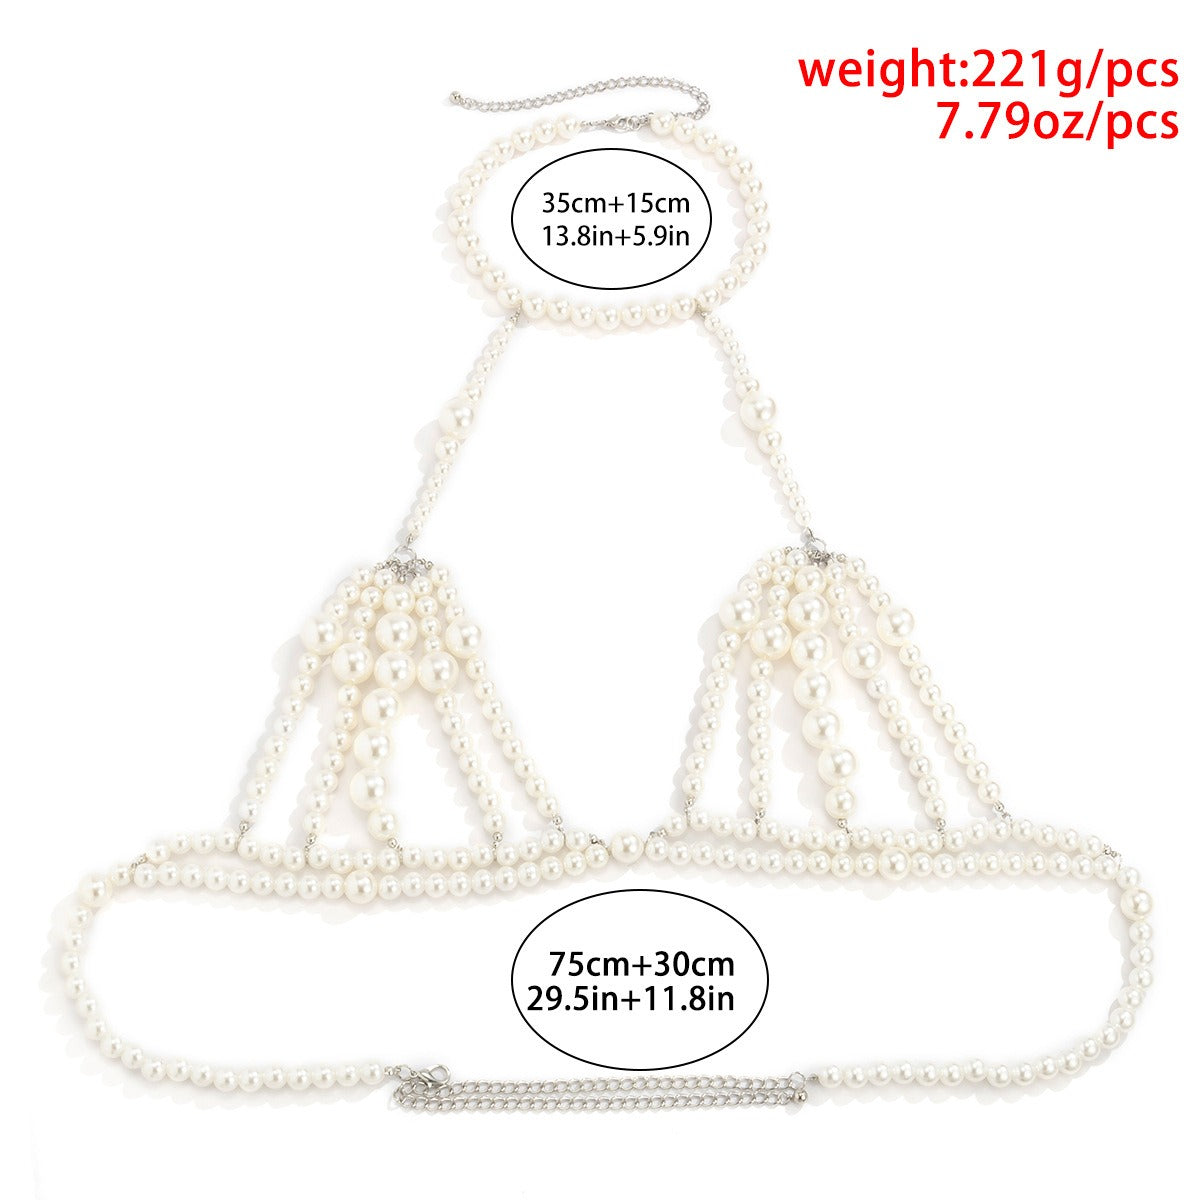 Minimalist Multi-layer Imitation Chain with Pearl Sized Bead for Body, Waist and Chest